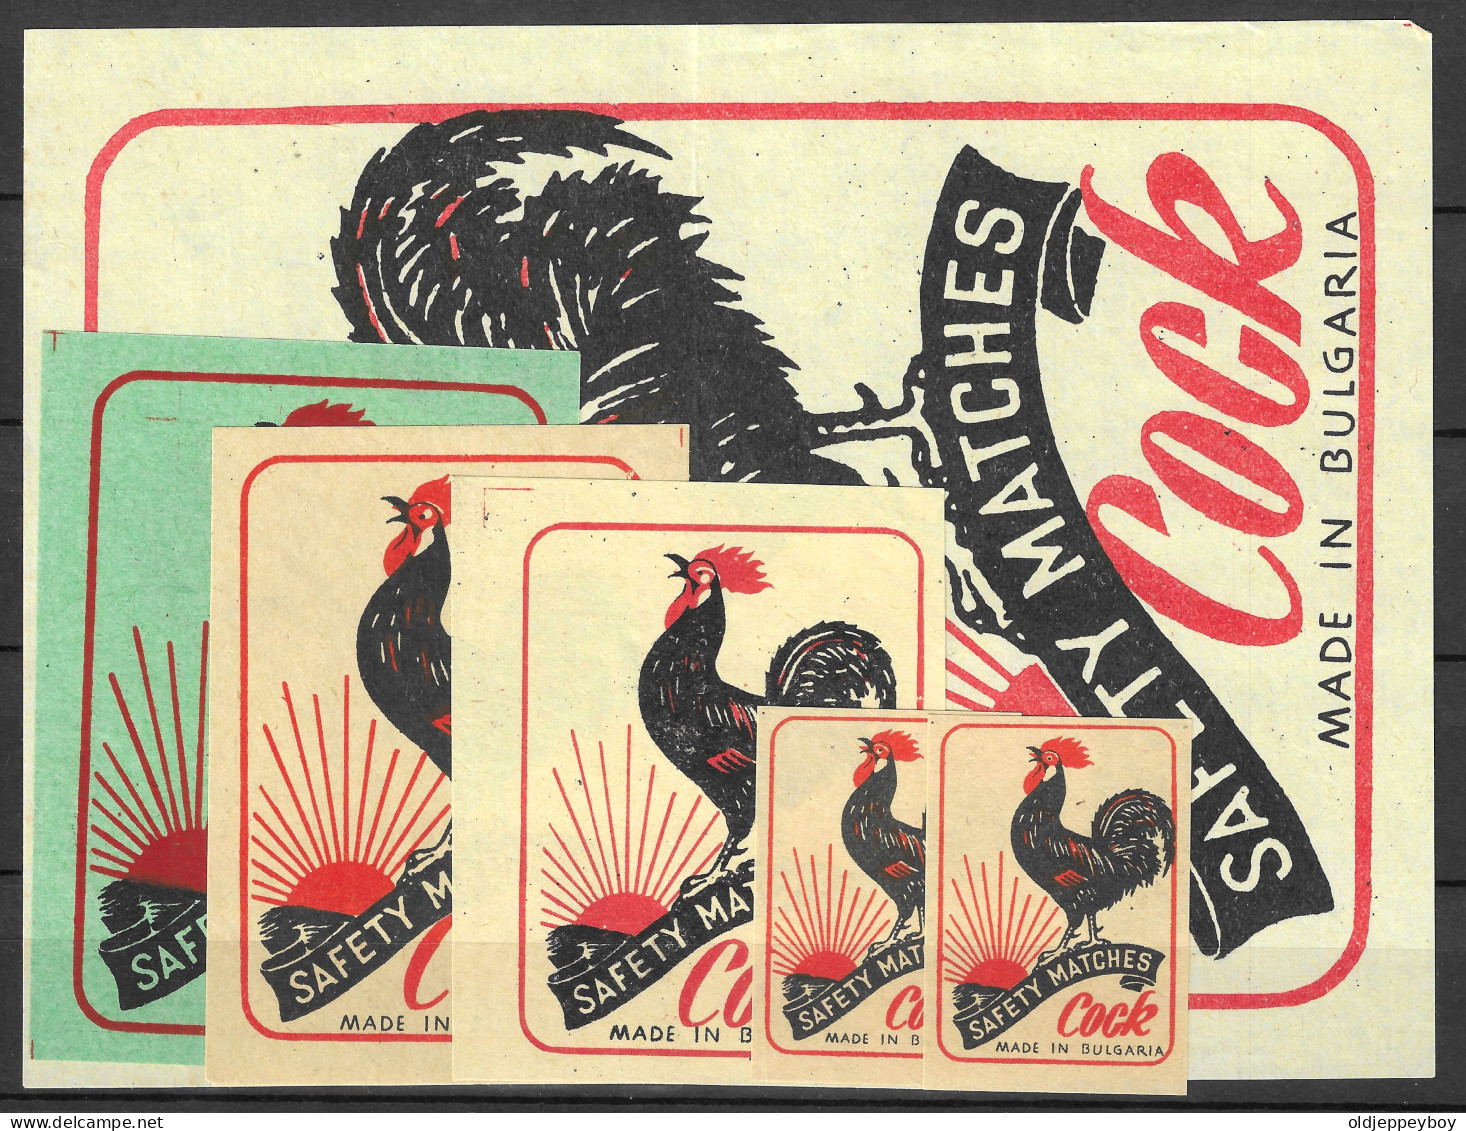  MADE IN BULGARIA MATCHBOX LABEL "COCK "  FULL SET OF 6 DIF SIZES SEE SCAN FOR SIZES EXTRA  LARGE RARE - Matchbox Labels